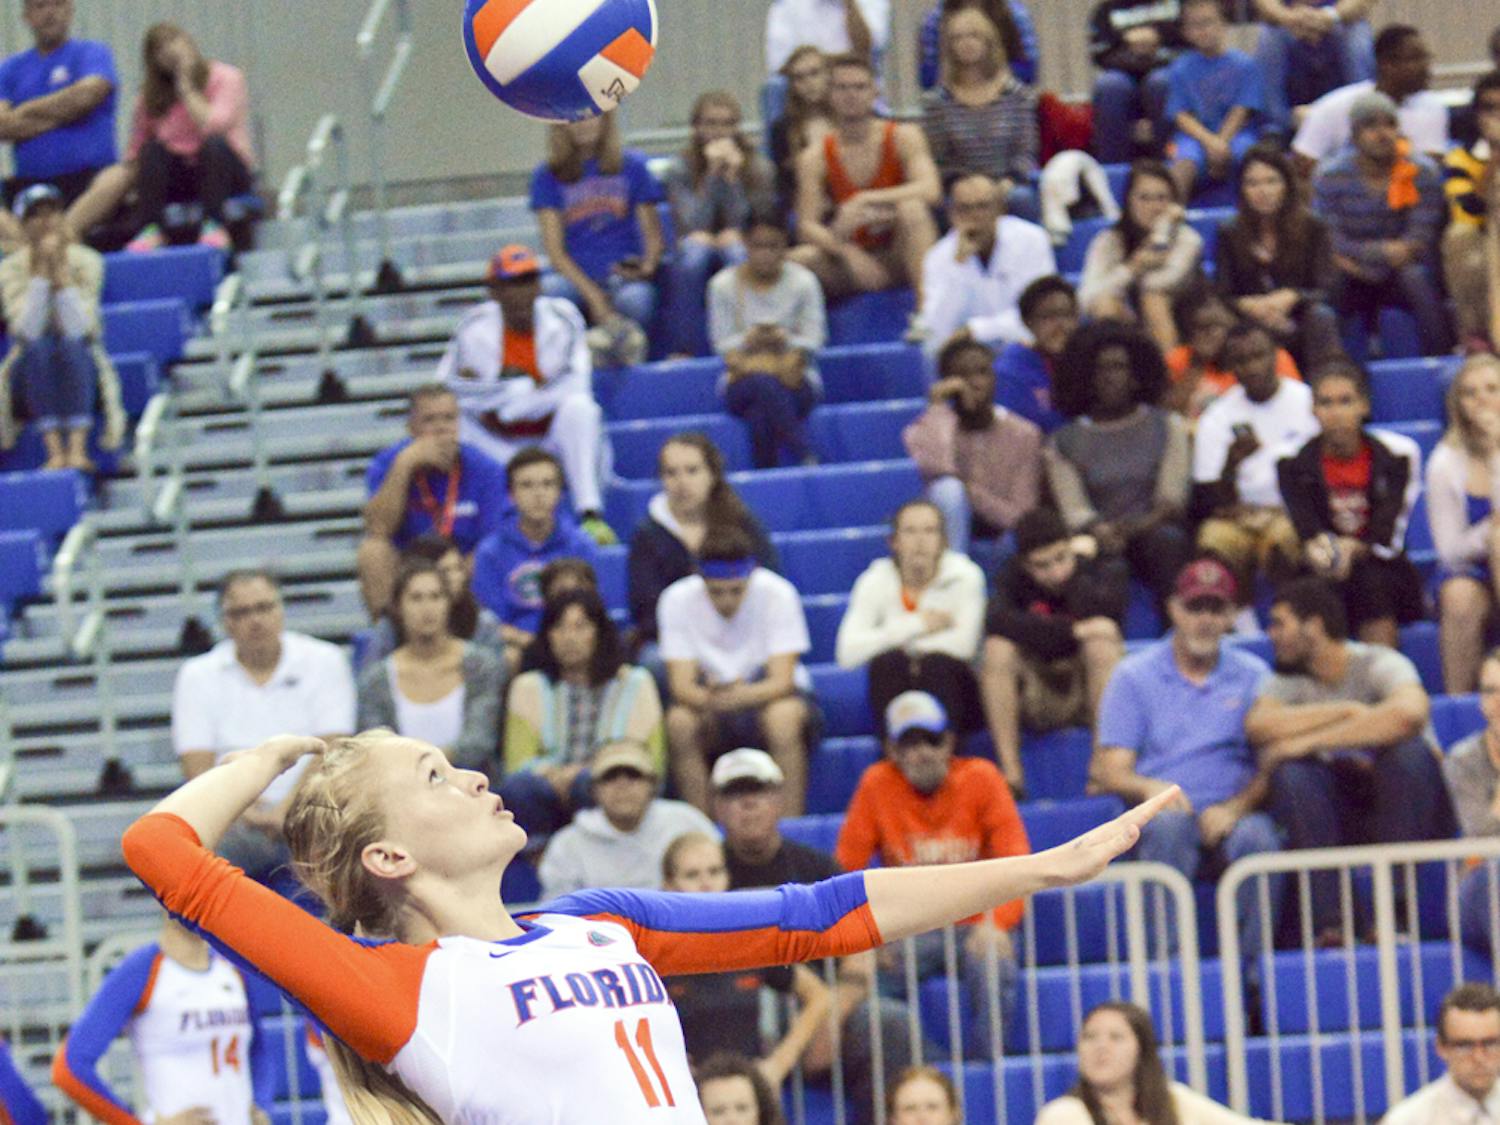 Of the three seniors, Monserez is usually the one who flies under the radar.Most of her contributions have come off the bench in relief for Pole and Unroe.But the Orlando native became an integral cog in Florida’s defense during her four years.Highlights such as a 23-dig outing against Tennessee during the 2012 season, digging a ball over press row during a match and setting up service runs are just a few of Monserez’s best moments during her time with Florida.In her final season with UF, Monserez is averaging 1.89 digs per set and set a career-high with 15 service aces while assuming the role as Florida’s main backup defensive specialist. She’s second on the Gators’ roster in reception attempts (496), and her .986 reception percentage this season is the highest among Florida’s backline players.